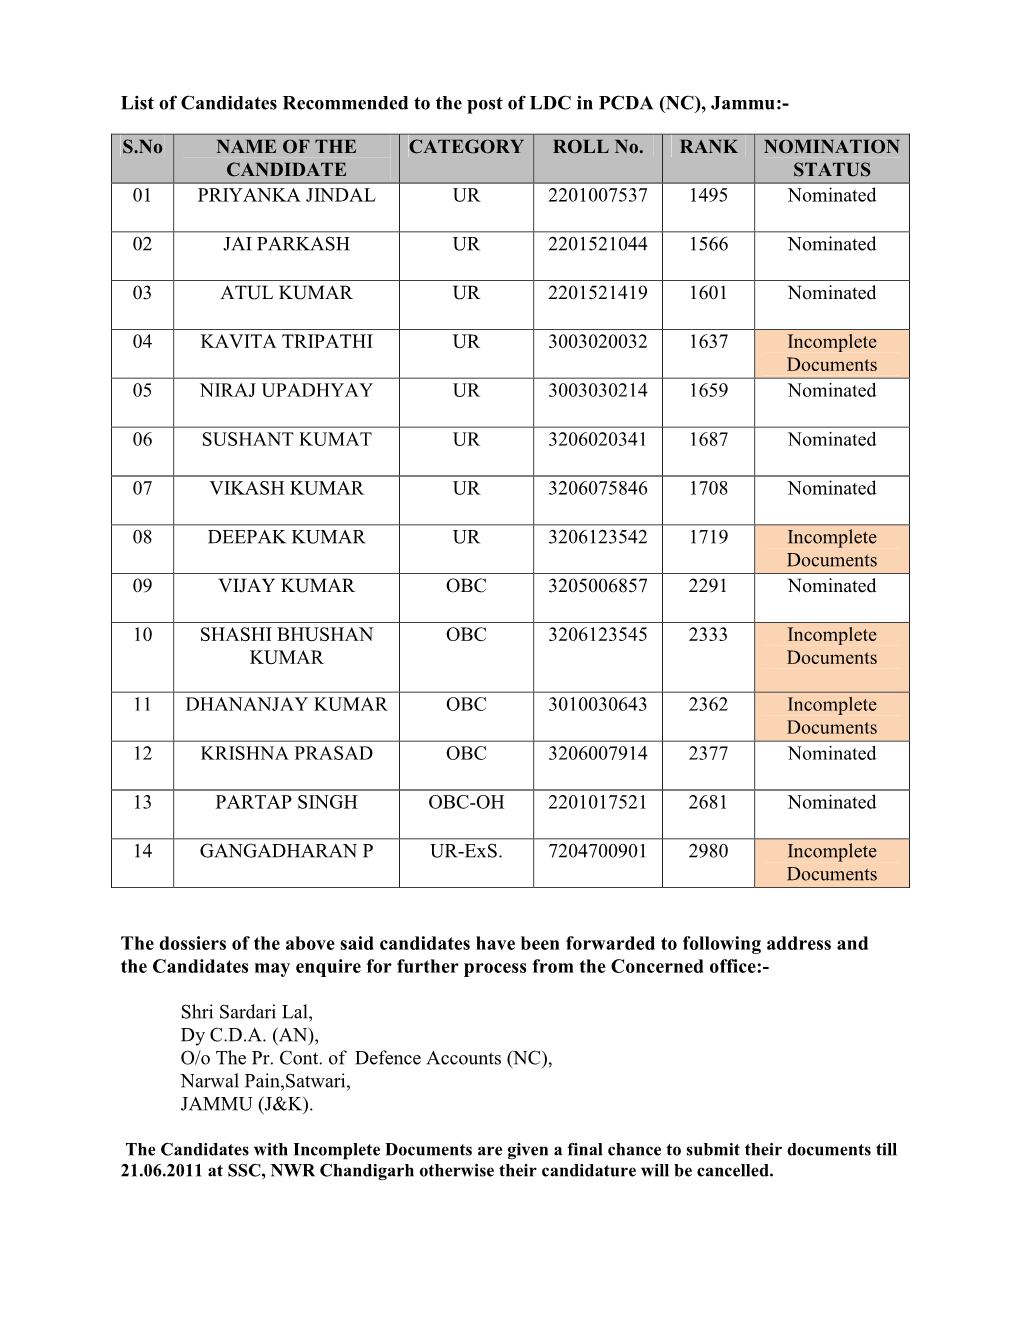 List of Candidates Recommended to the Post of LDC in PCDA (NC), Jammu